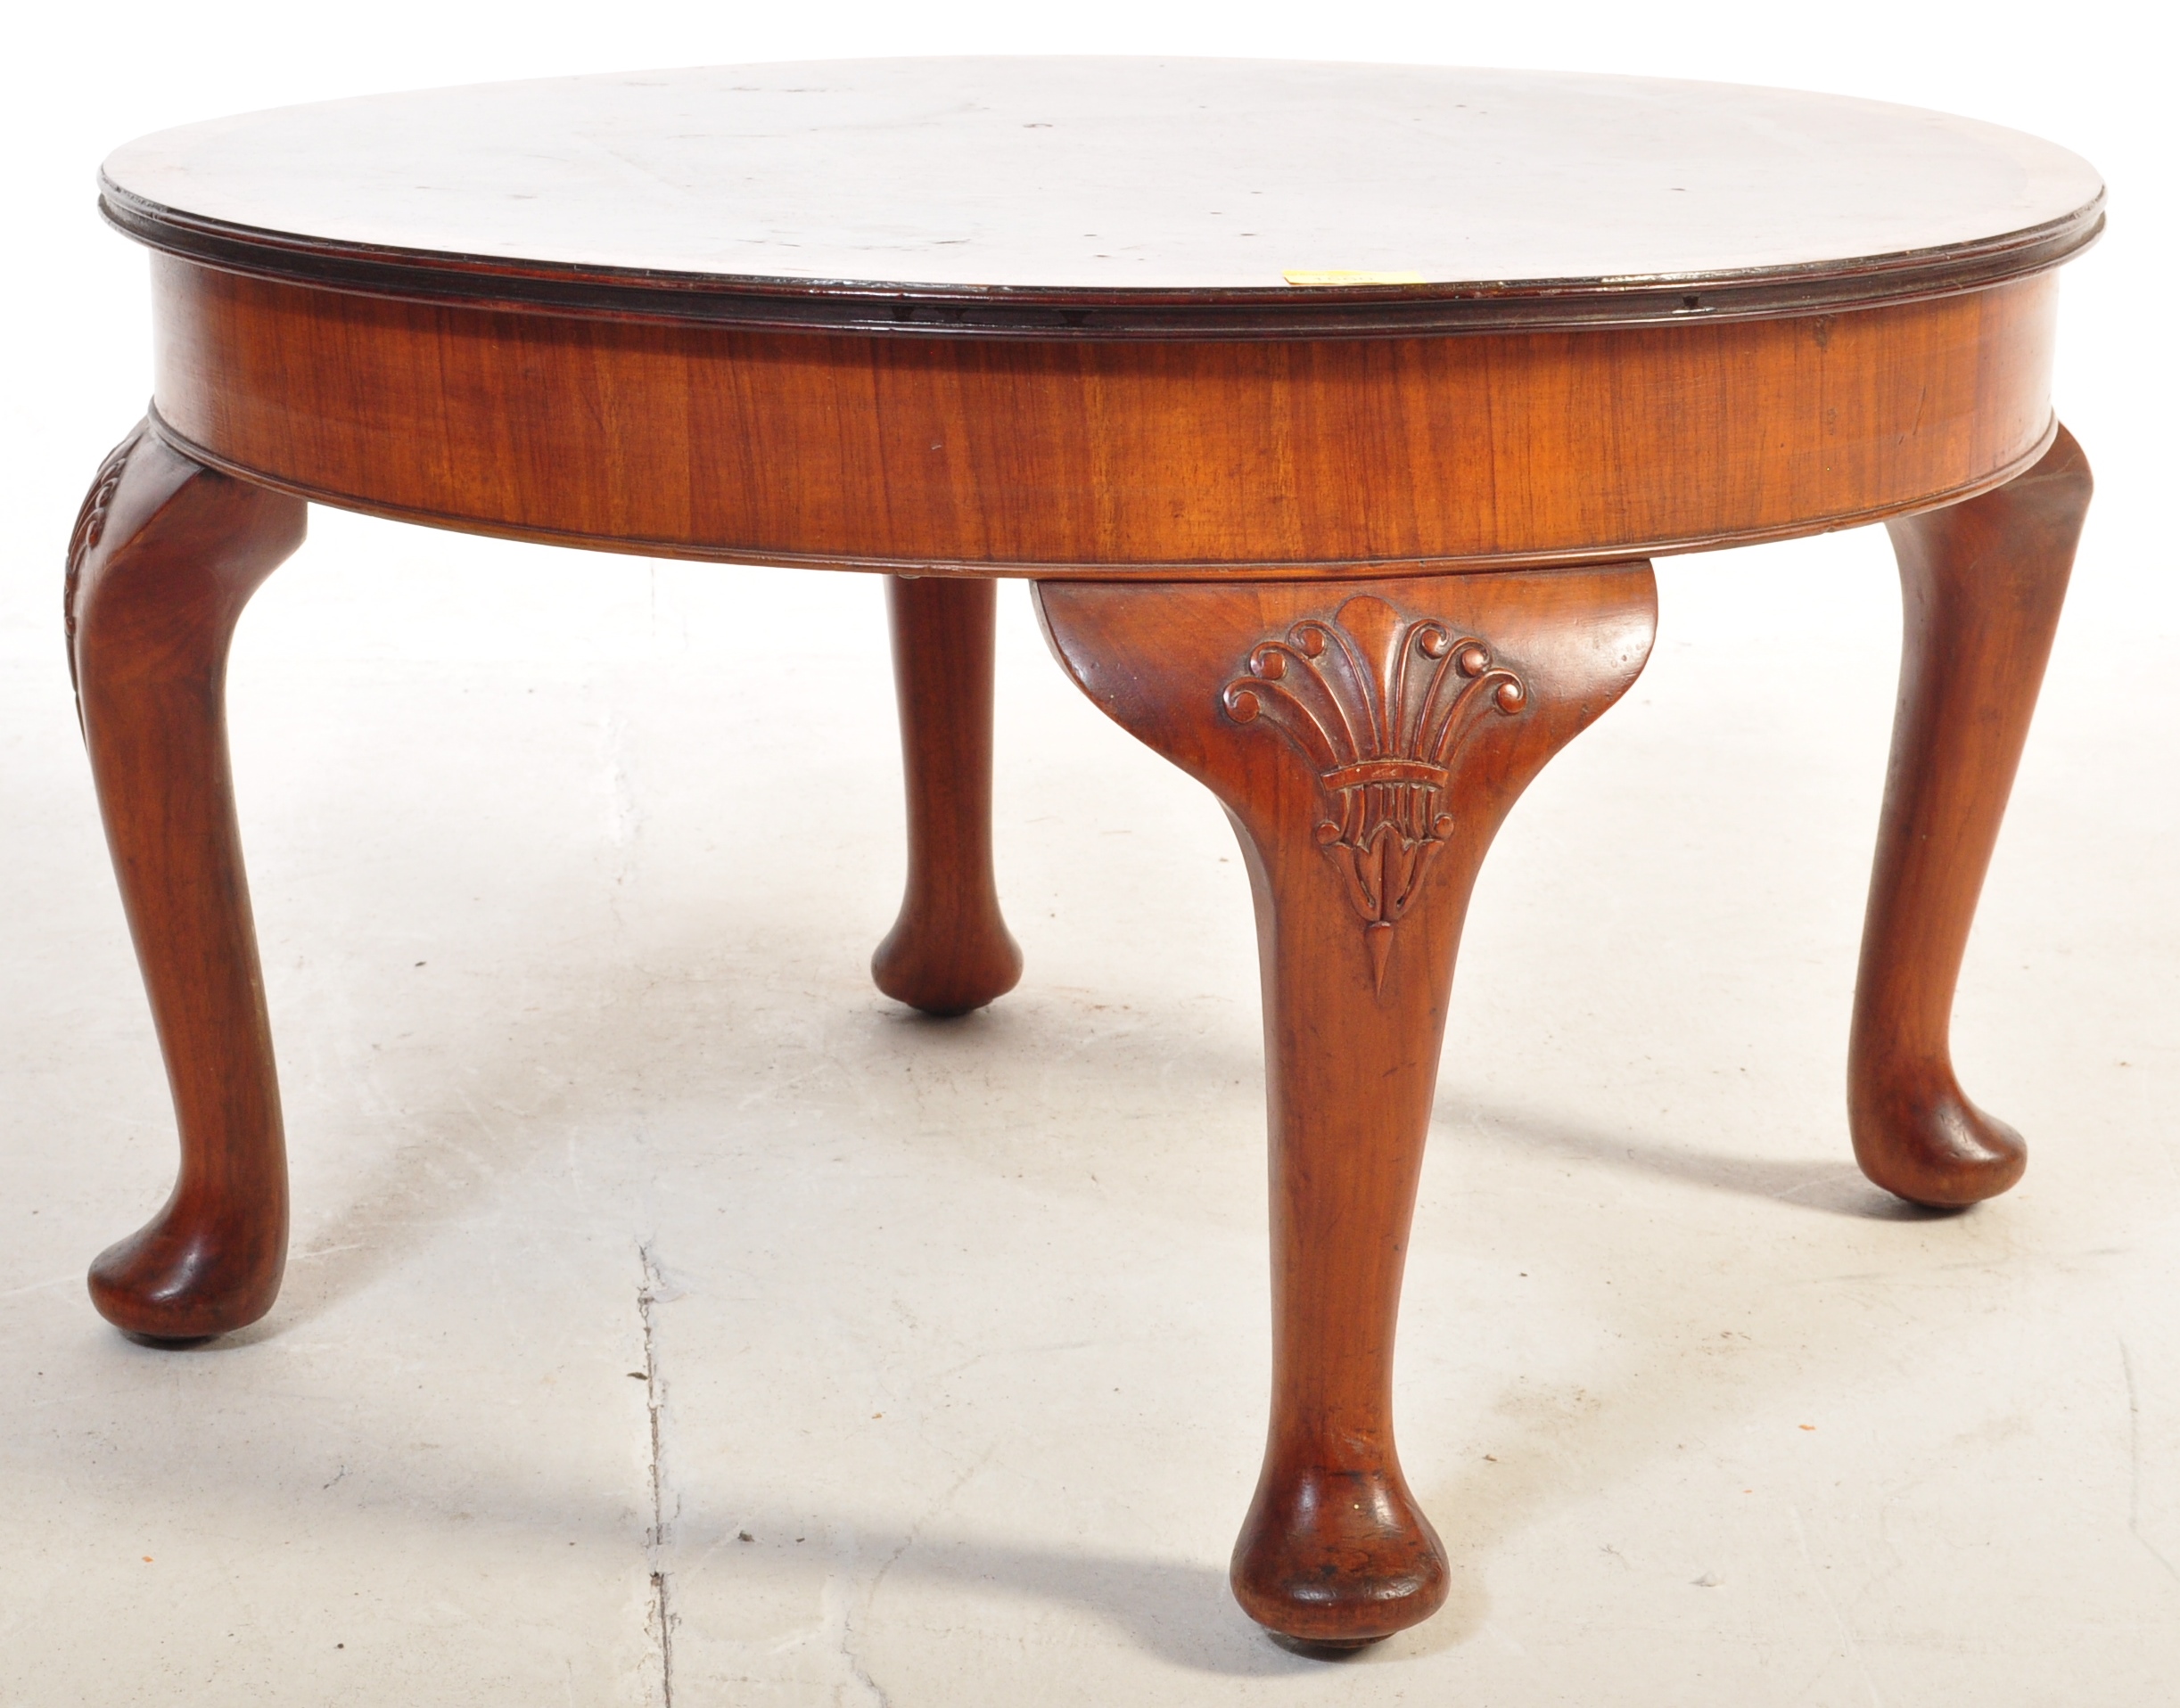 20TH CENTURY QUEEN ANNE REVIVAL WALNUT COFFEE TABLE